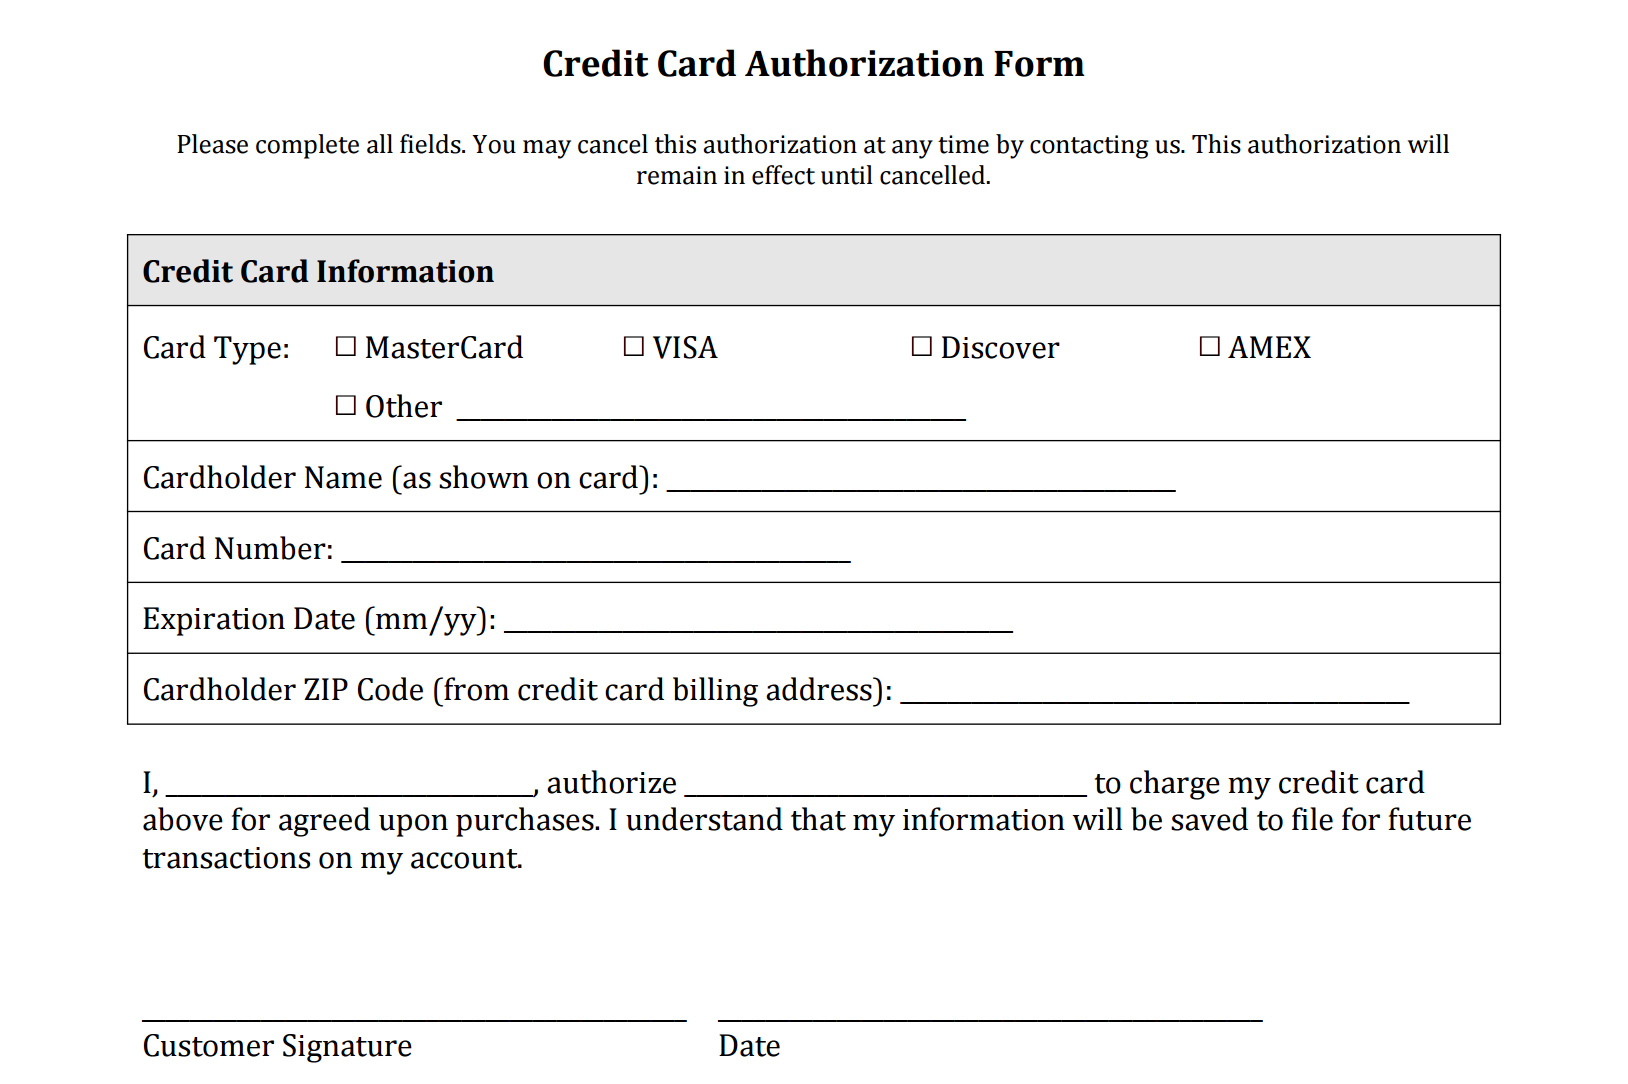 Credit Card Authorization Form Templates [Download] Inside Order Form With Credit Card Template